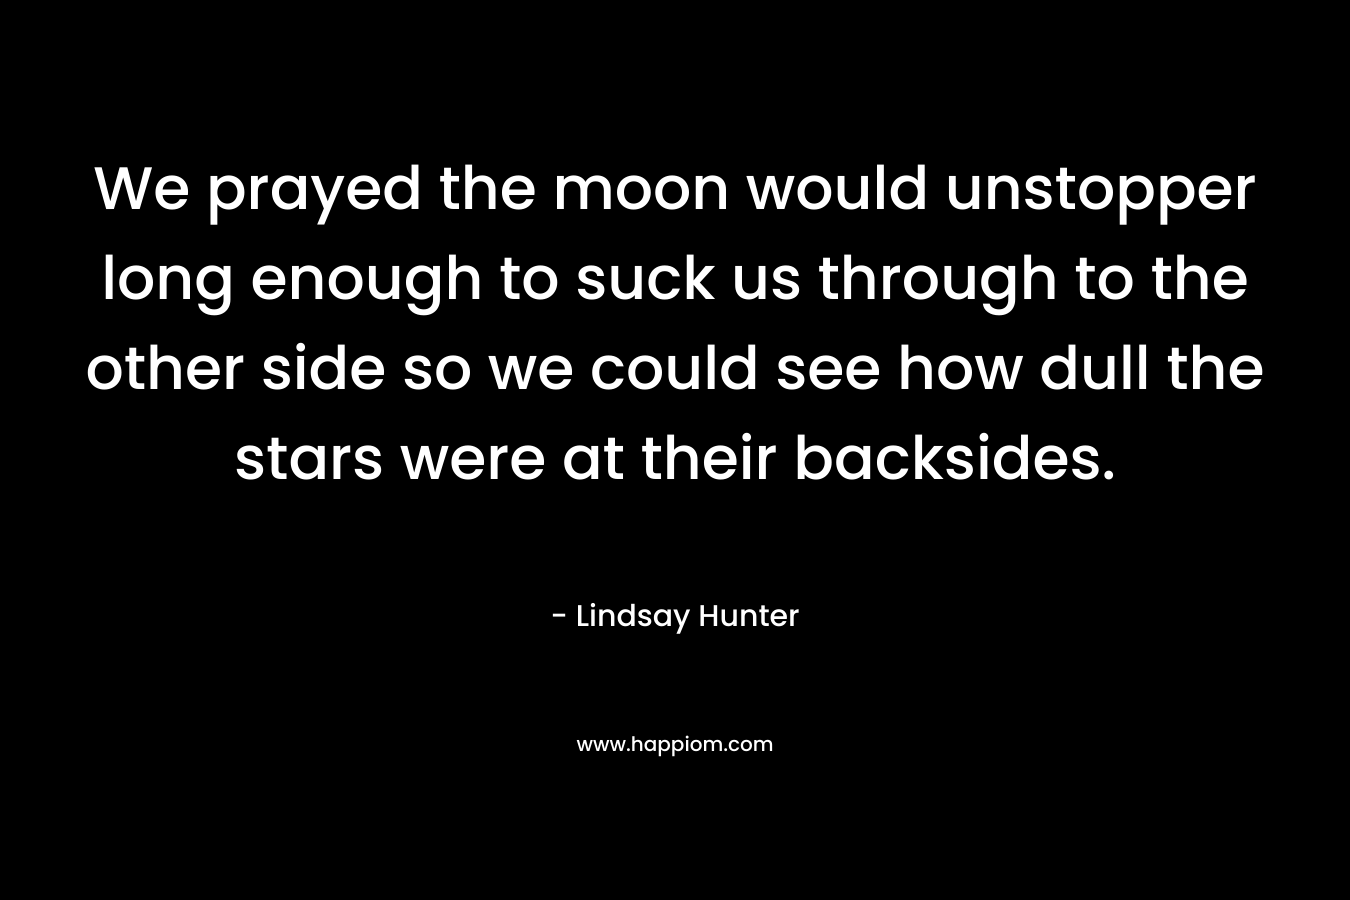 We prayed the moon would unstopper long enough to suck us through to the other side so we could see how dull the stars were at their backsides. – Lindsay Hunter